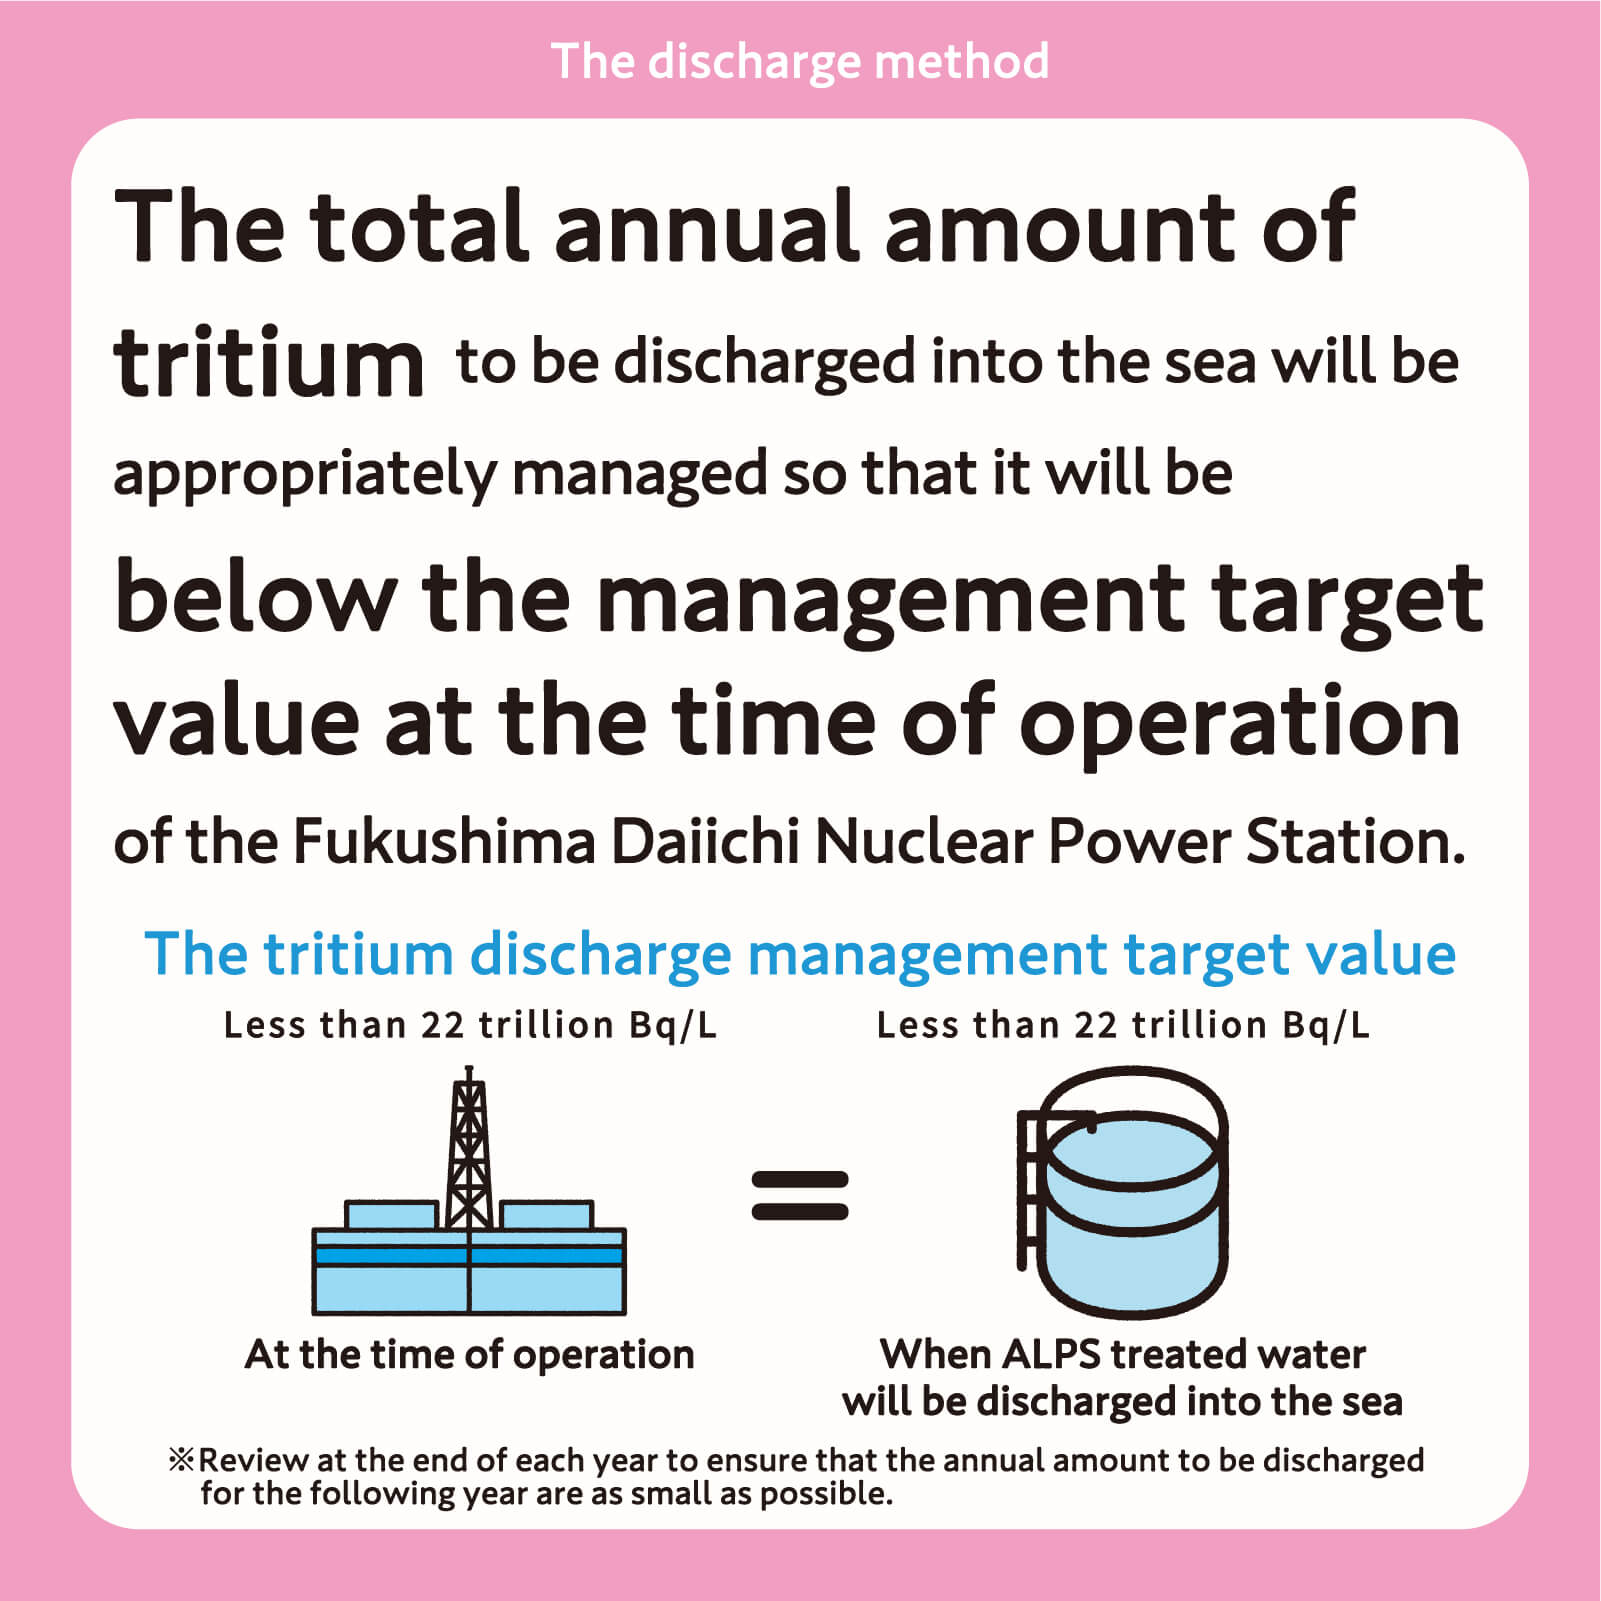 The total annual amount of tritium to be discharged into the sea has been appropriately managed so that it has been below the management target 
              value at the time of operation of the Fukushima Daiichi Nuclear Power Station.